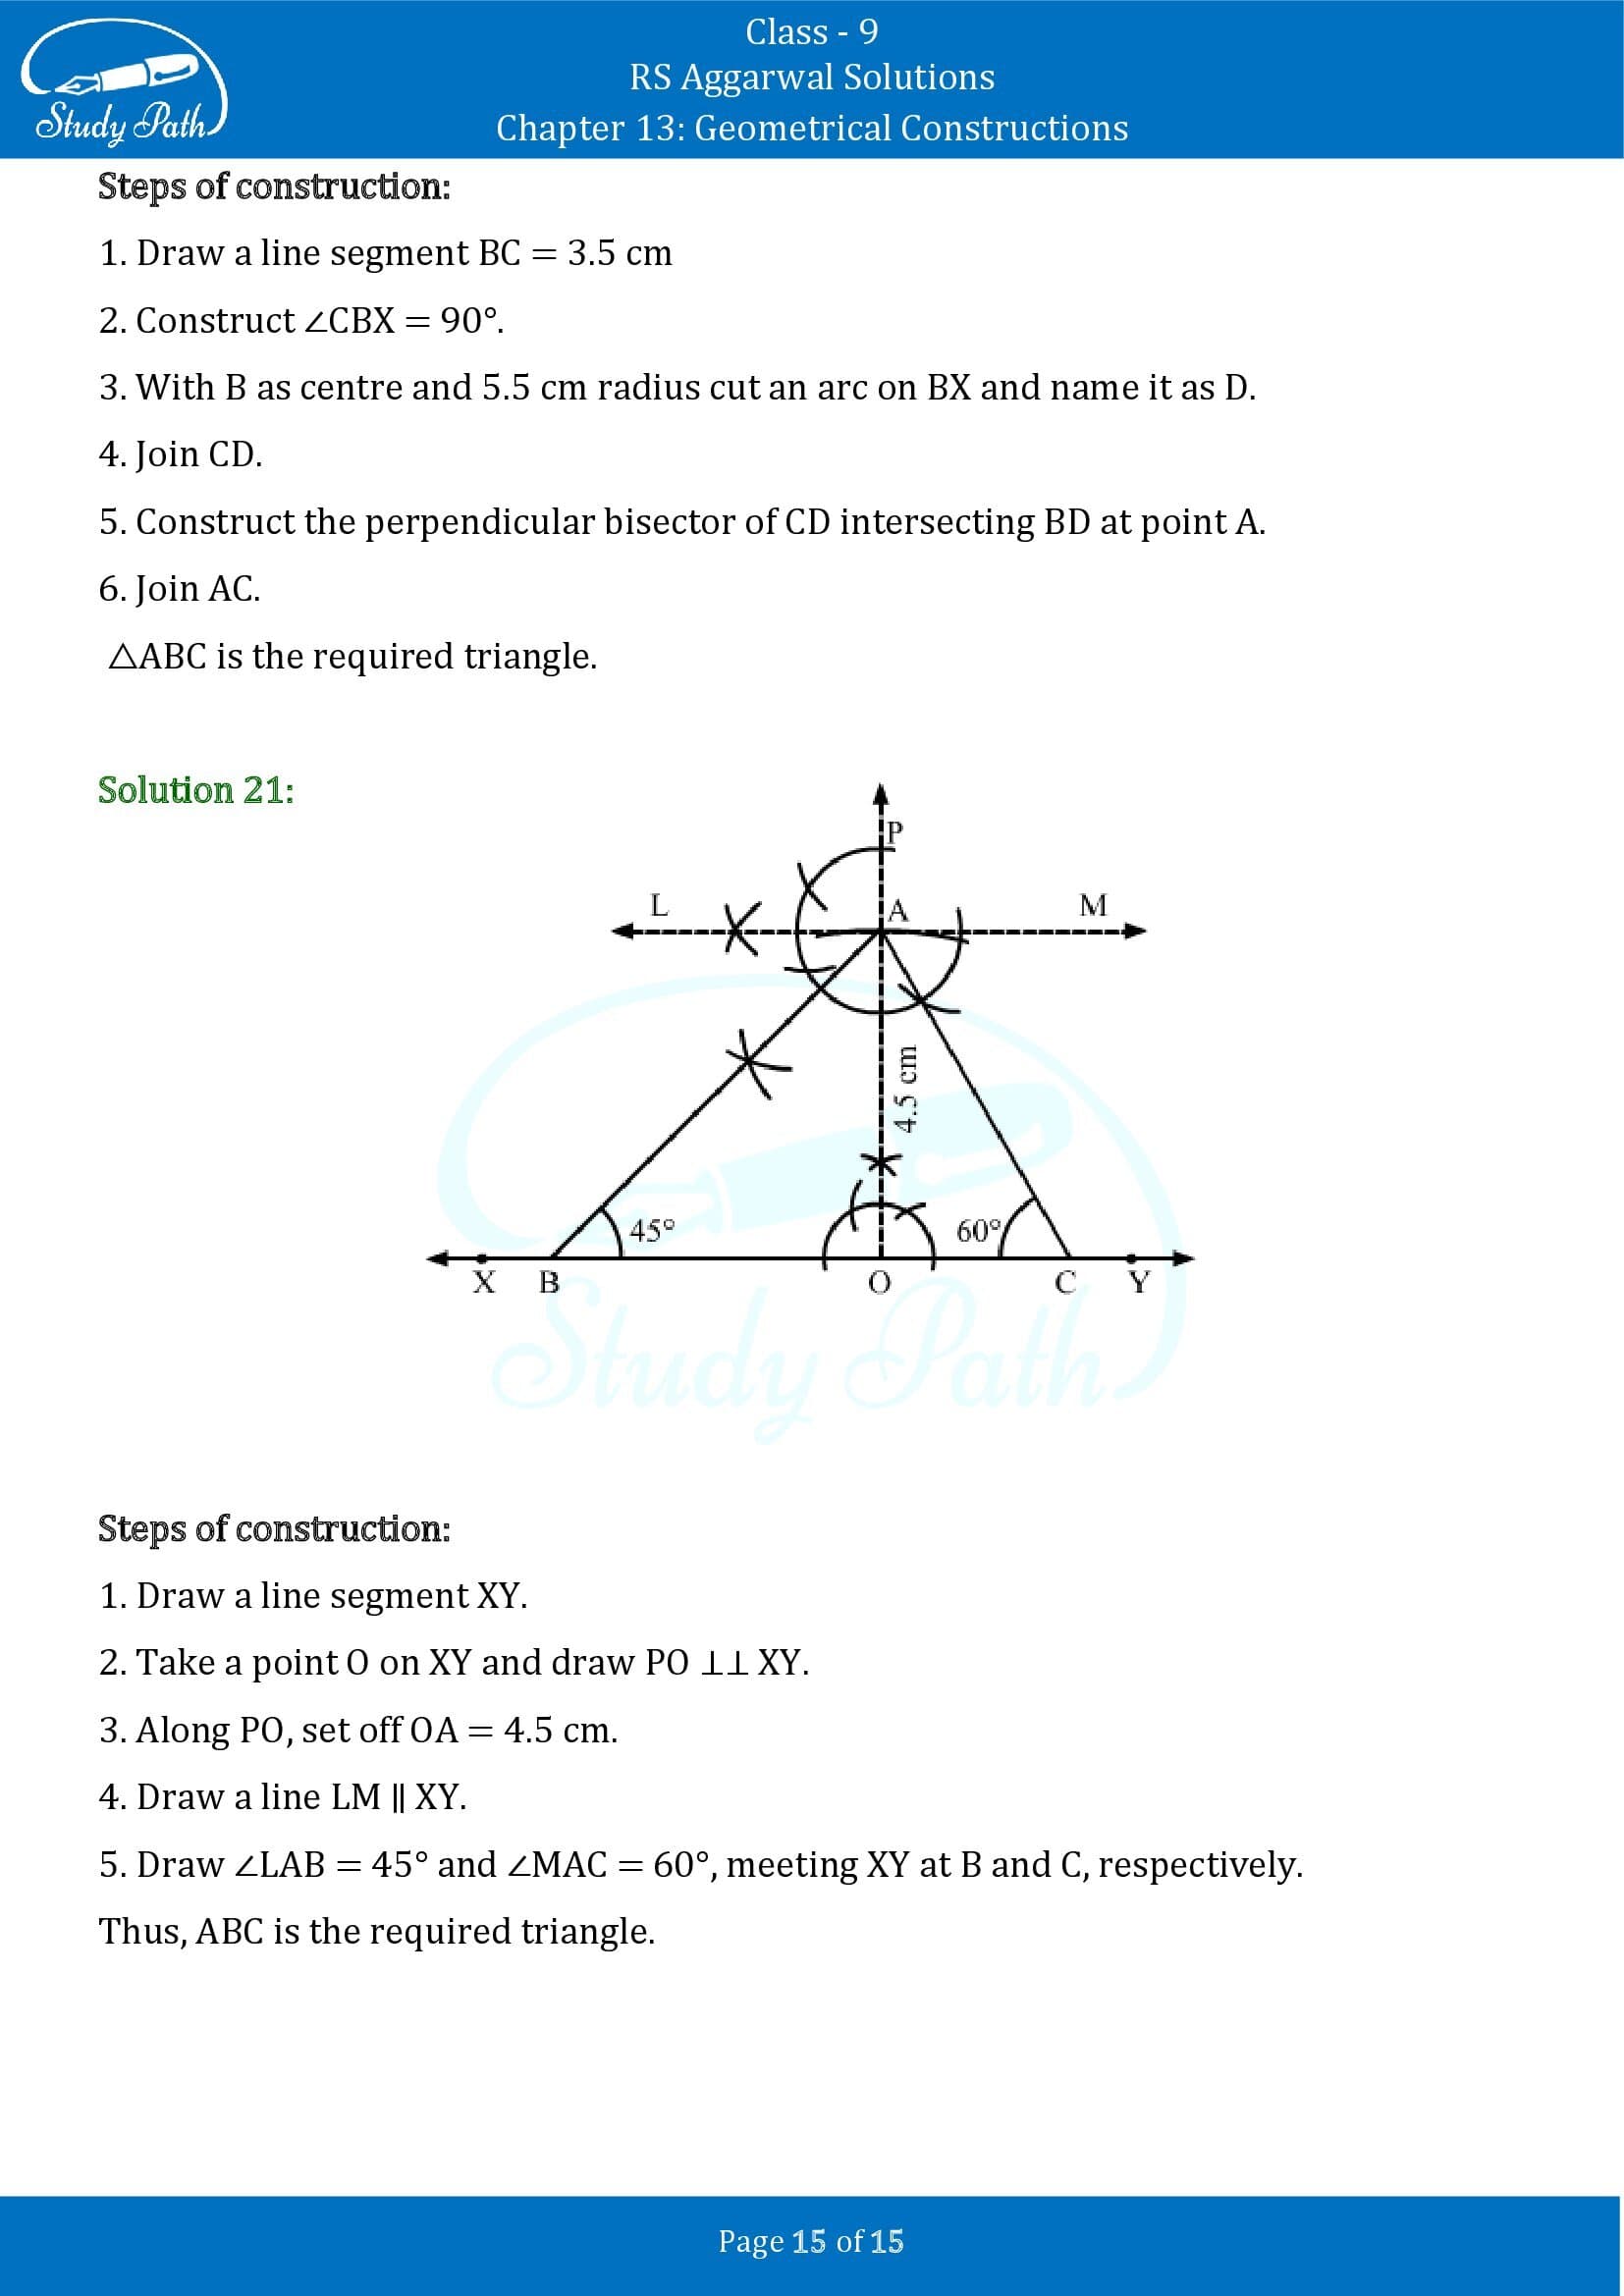 RS Aggarwal Solutions Class 9 Chapter 13 Geometrical Constructions 15